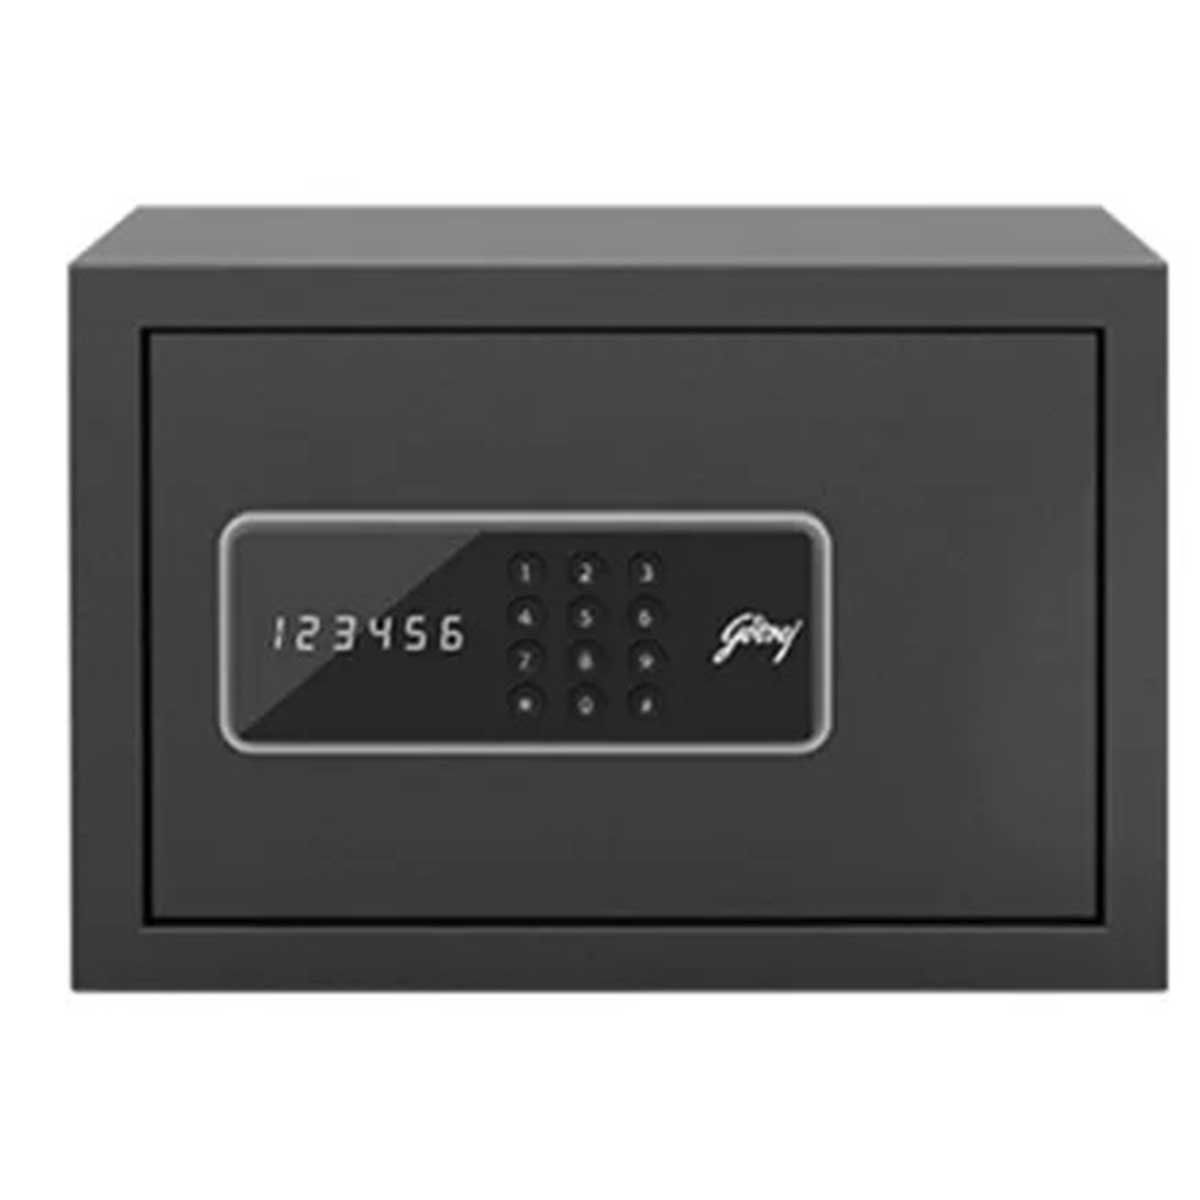 Security Safes Manufacturers, Suppliers in Dwarka Mor